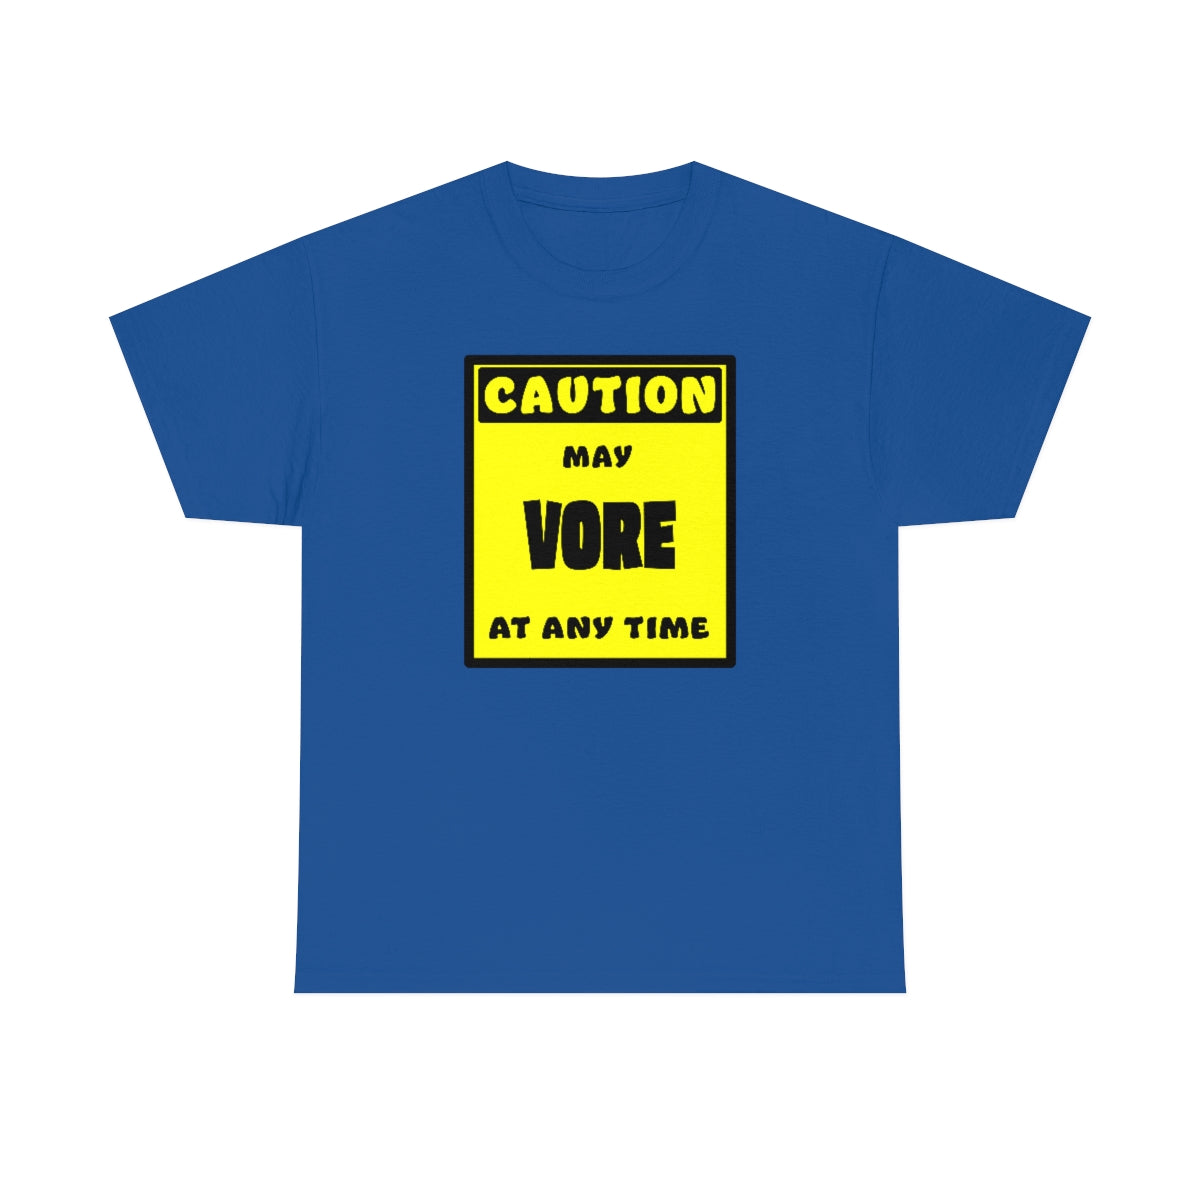 CAUTION! May VORE at any time! - T-Shirt T-Shirt AFLT-Whootorca Royal Blue S 